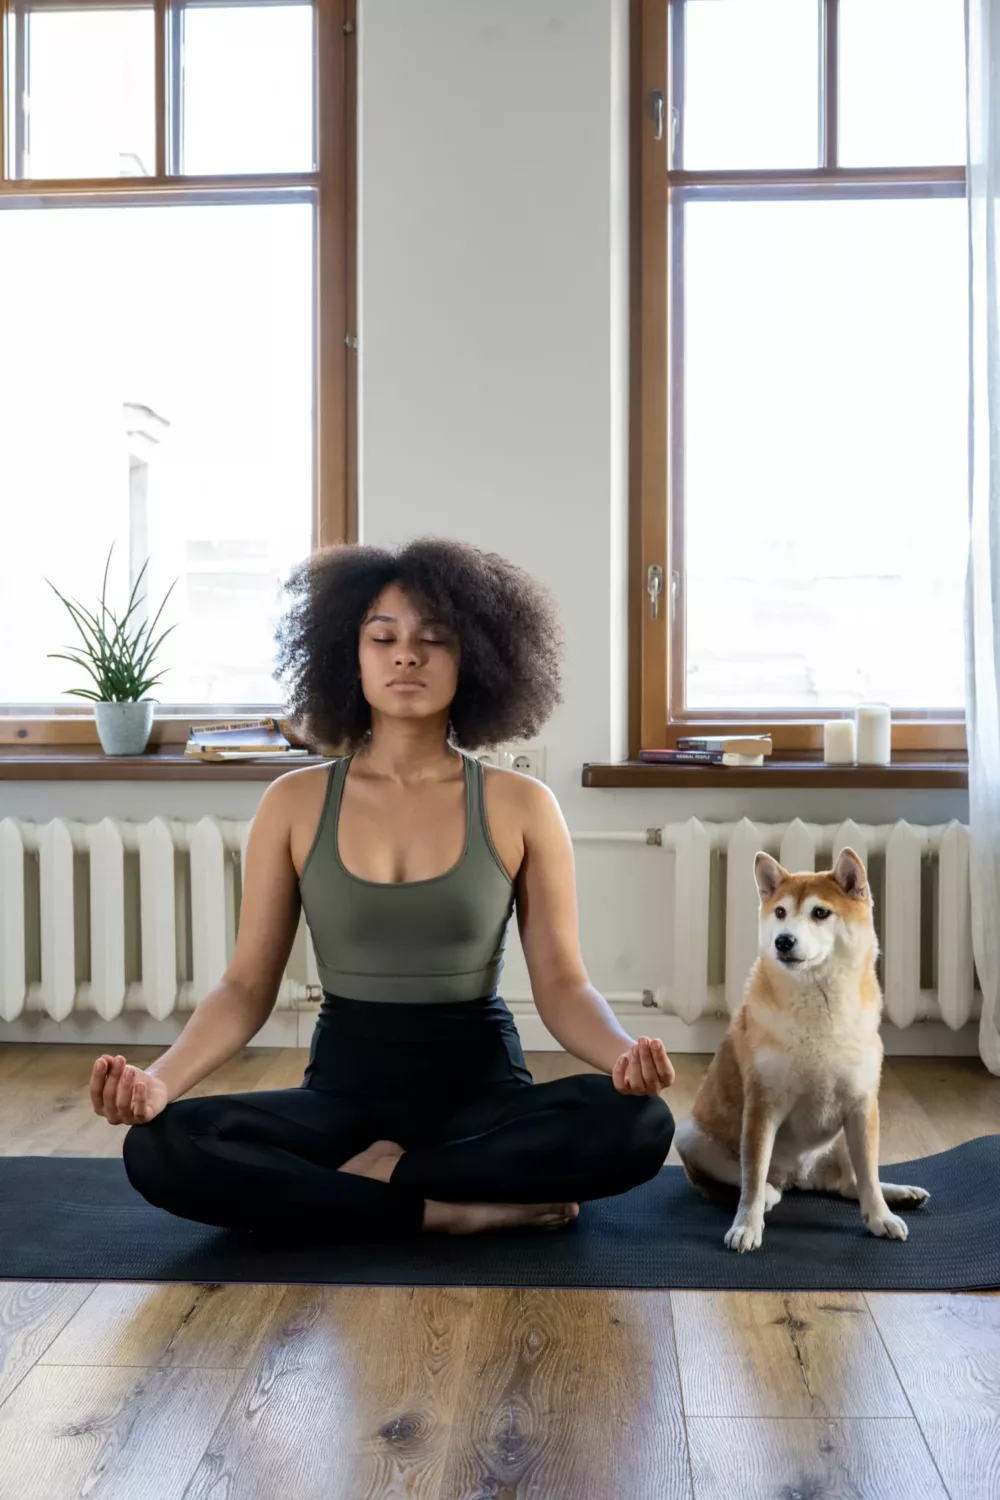 woman doing yoga with her dog